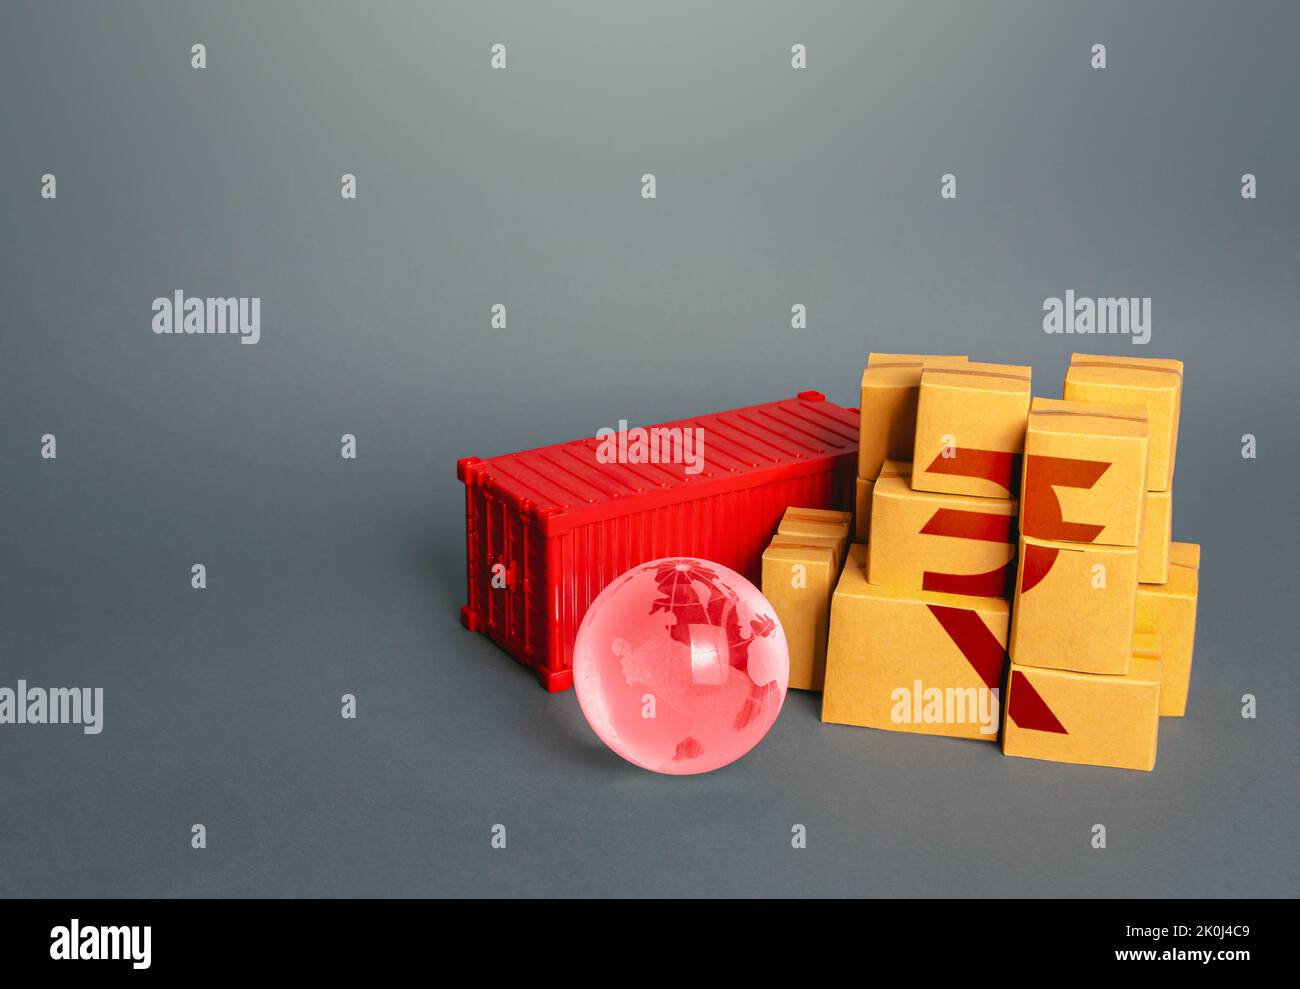 Boxes of goods and indian rupee symbol. Production, warehousing storage and shipping logistics worldwide. Manufacture freight and sale of products. Wo Stock Photo